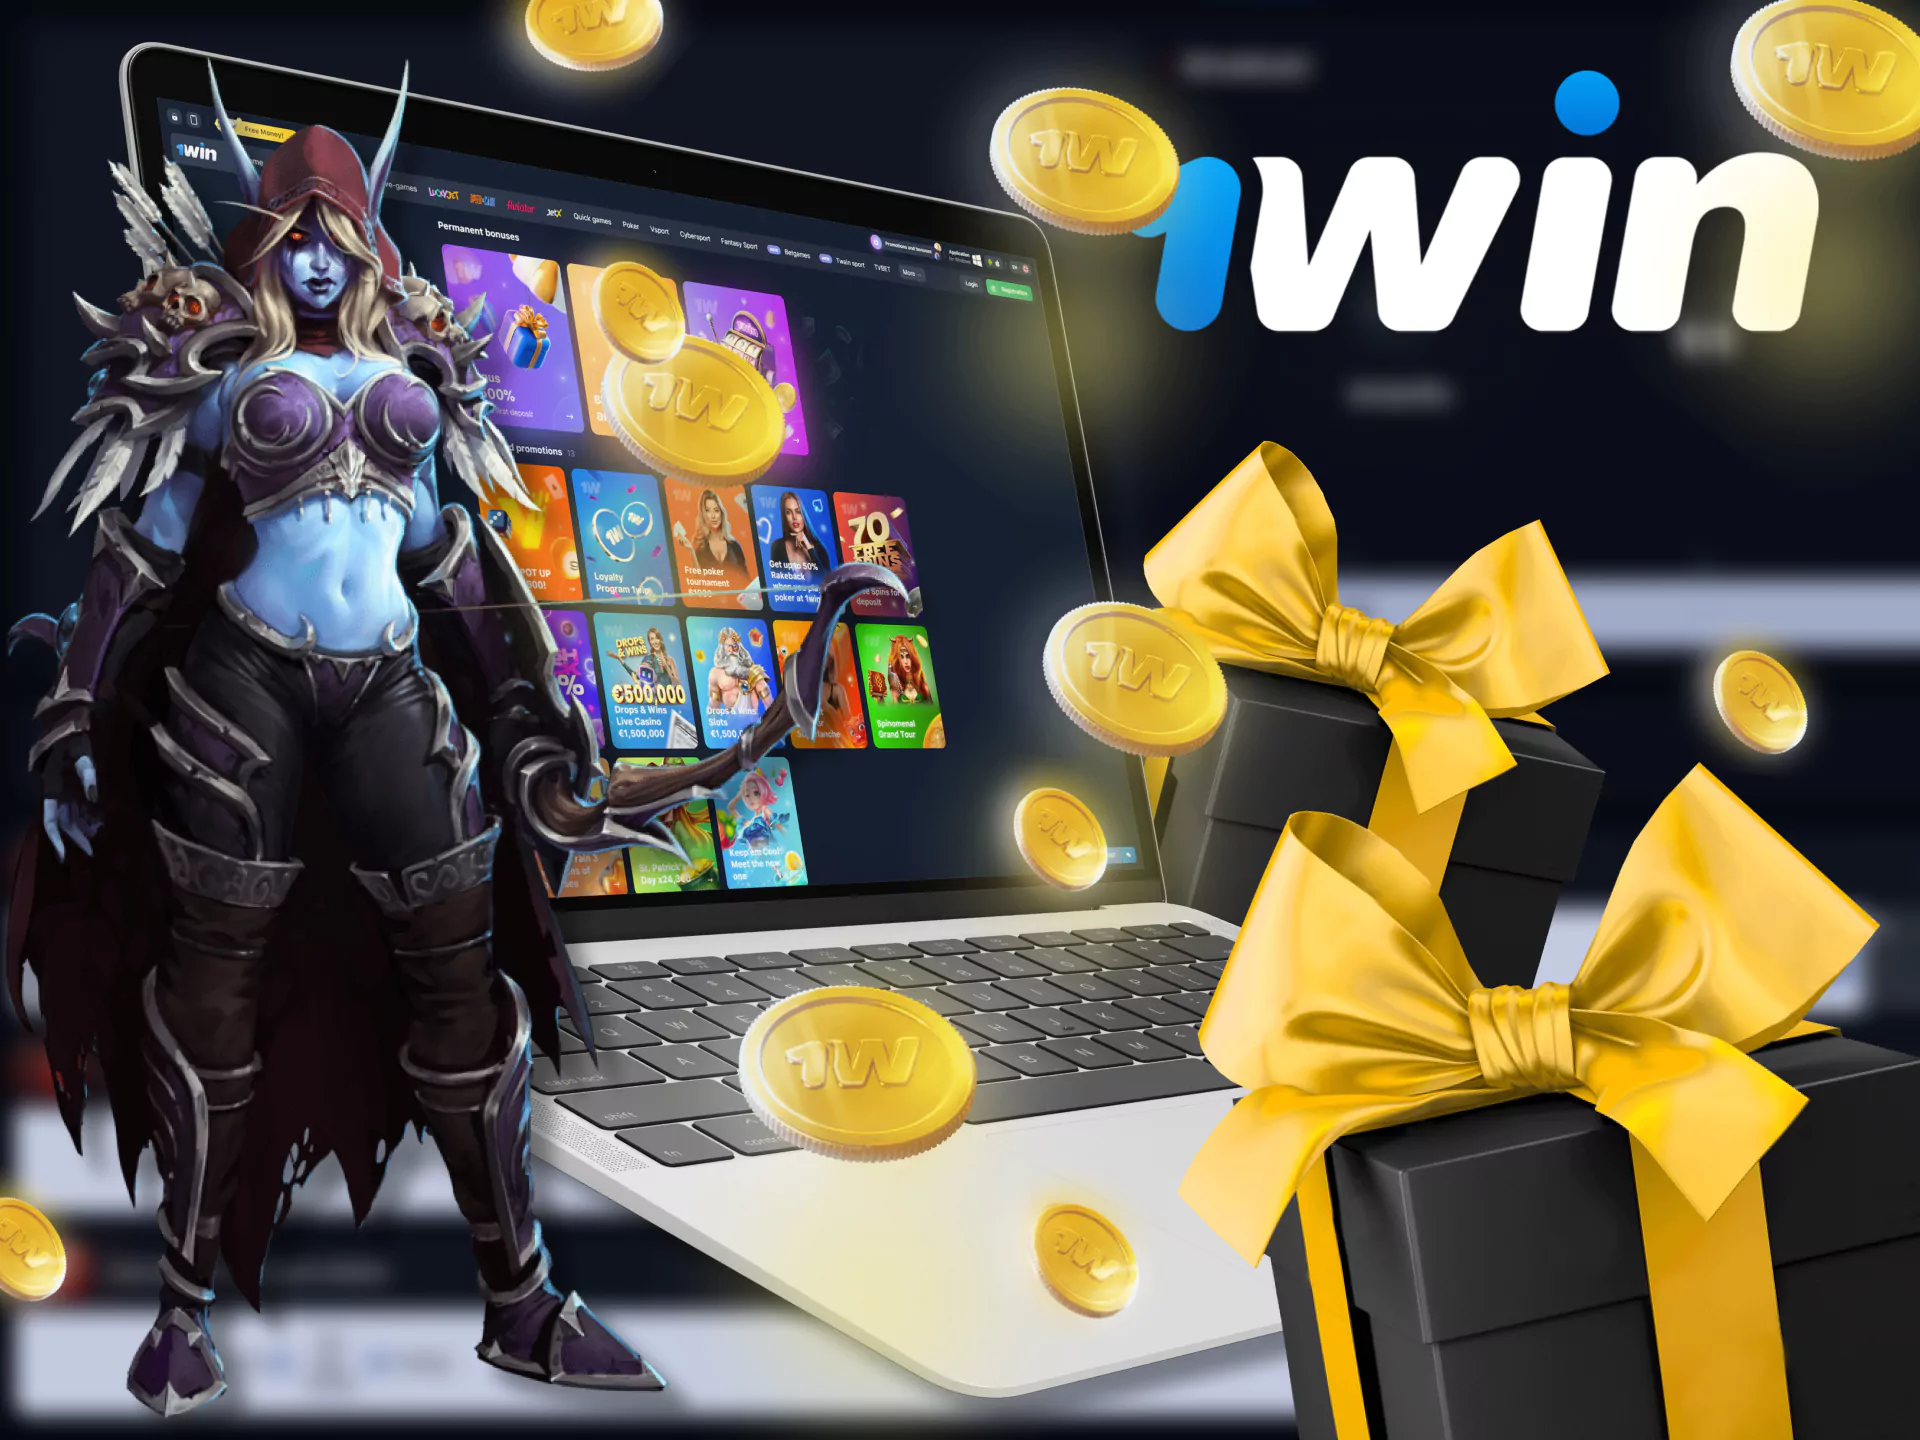 At 1Win, get a special bonus for betting on DOTA 2.